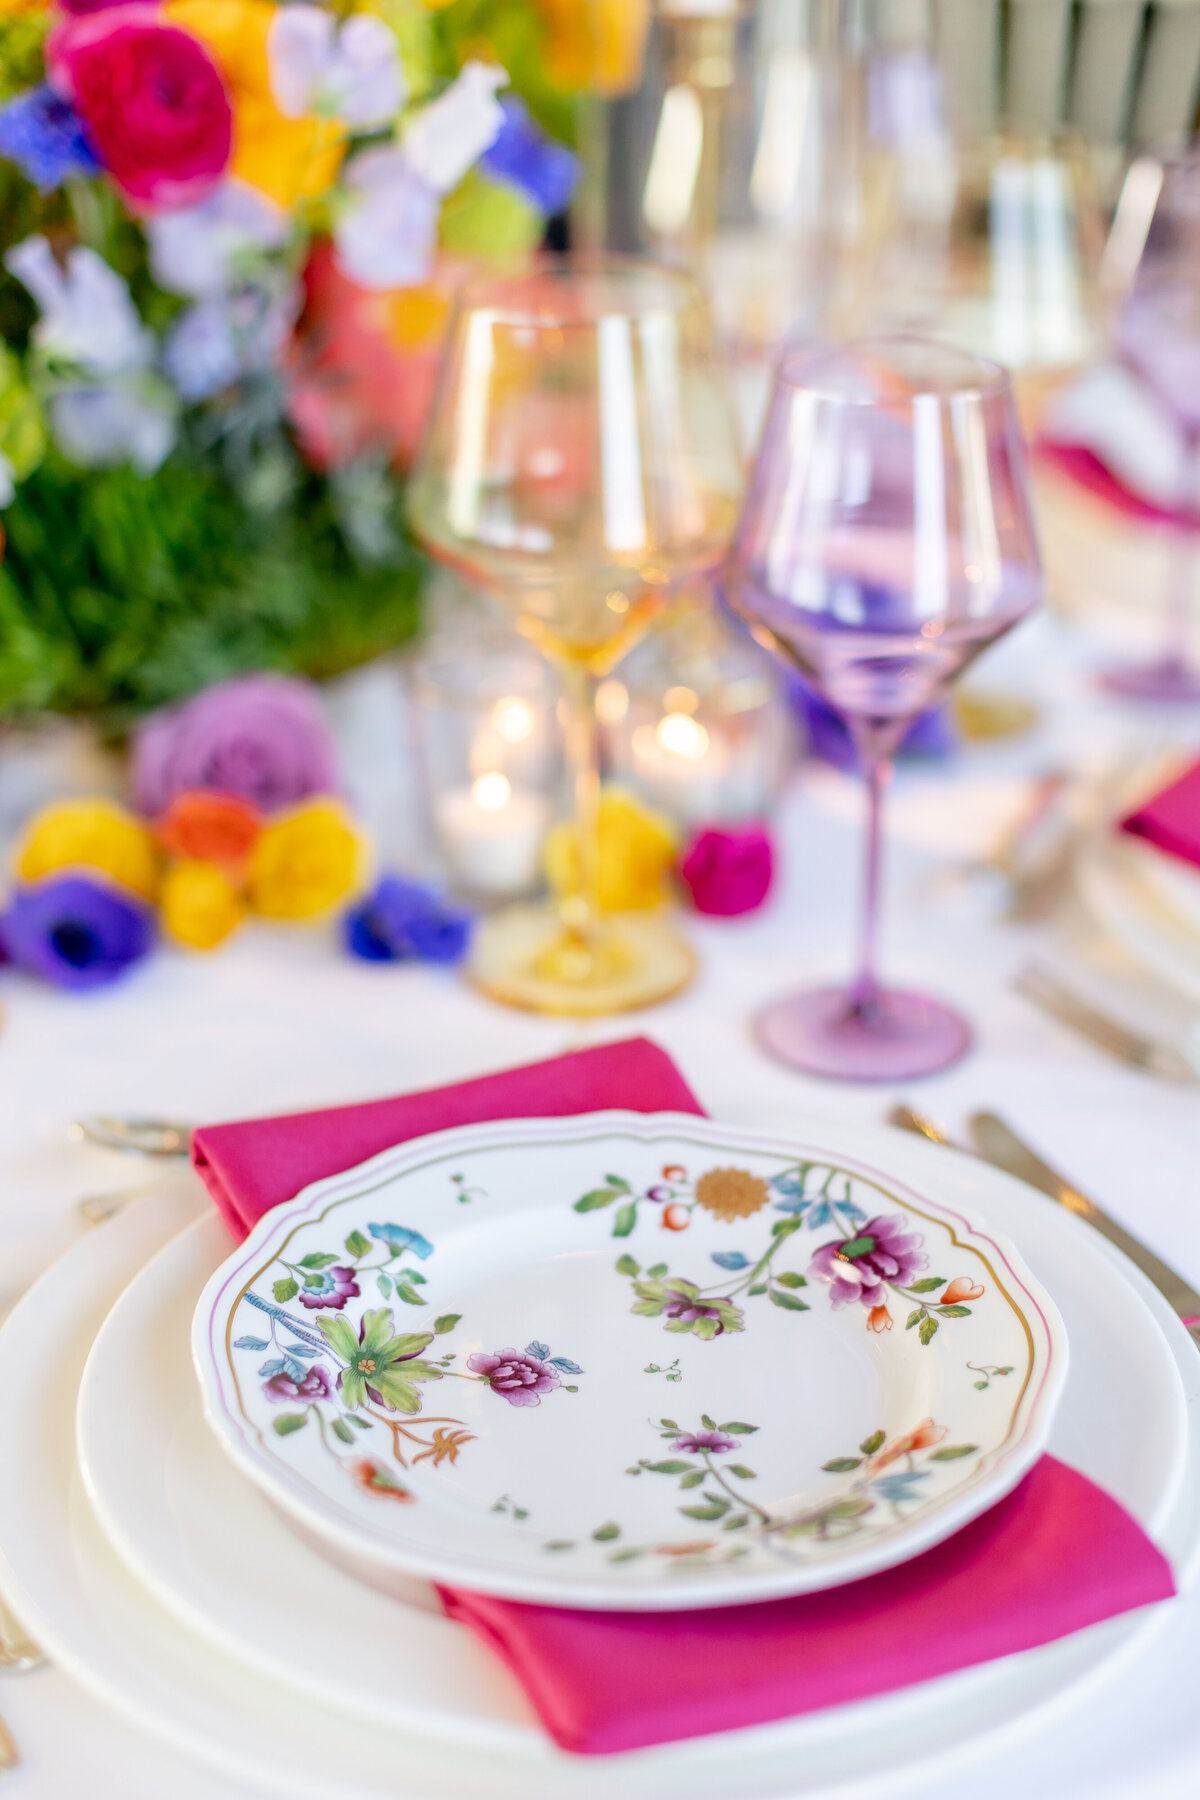 Patterned plate with a pink napkin